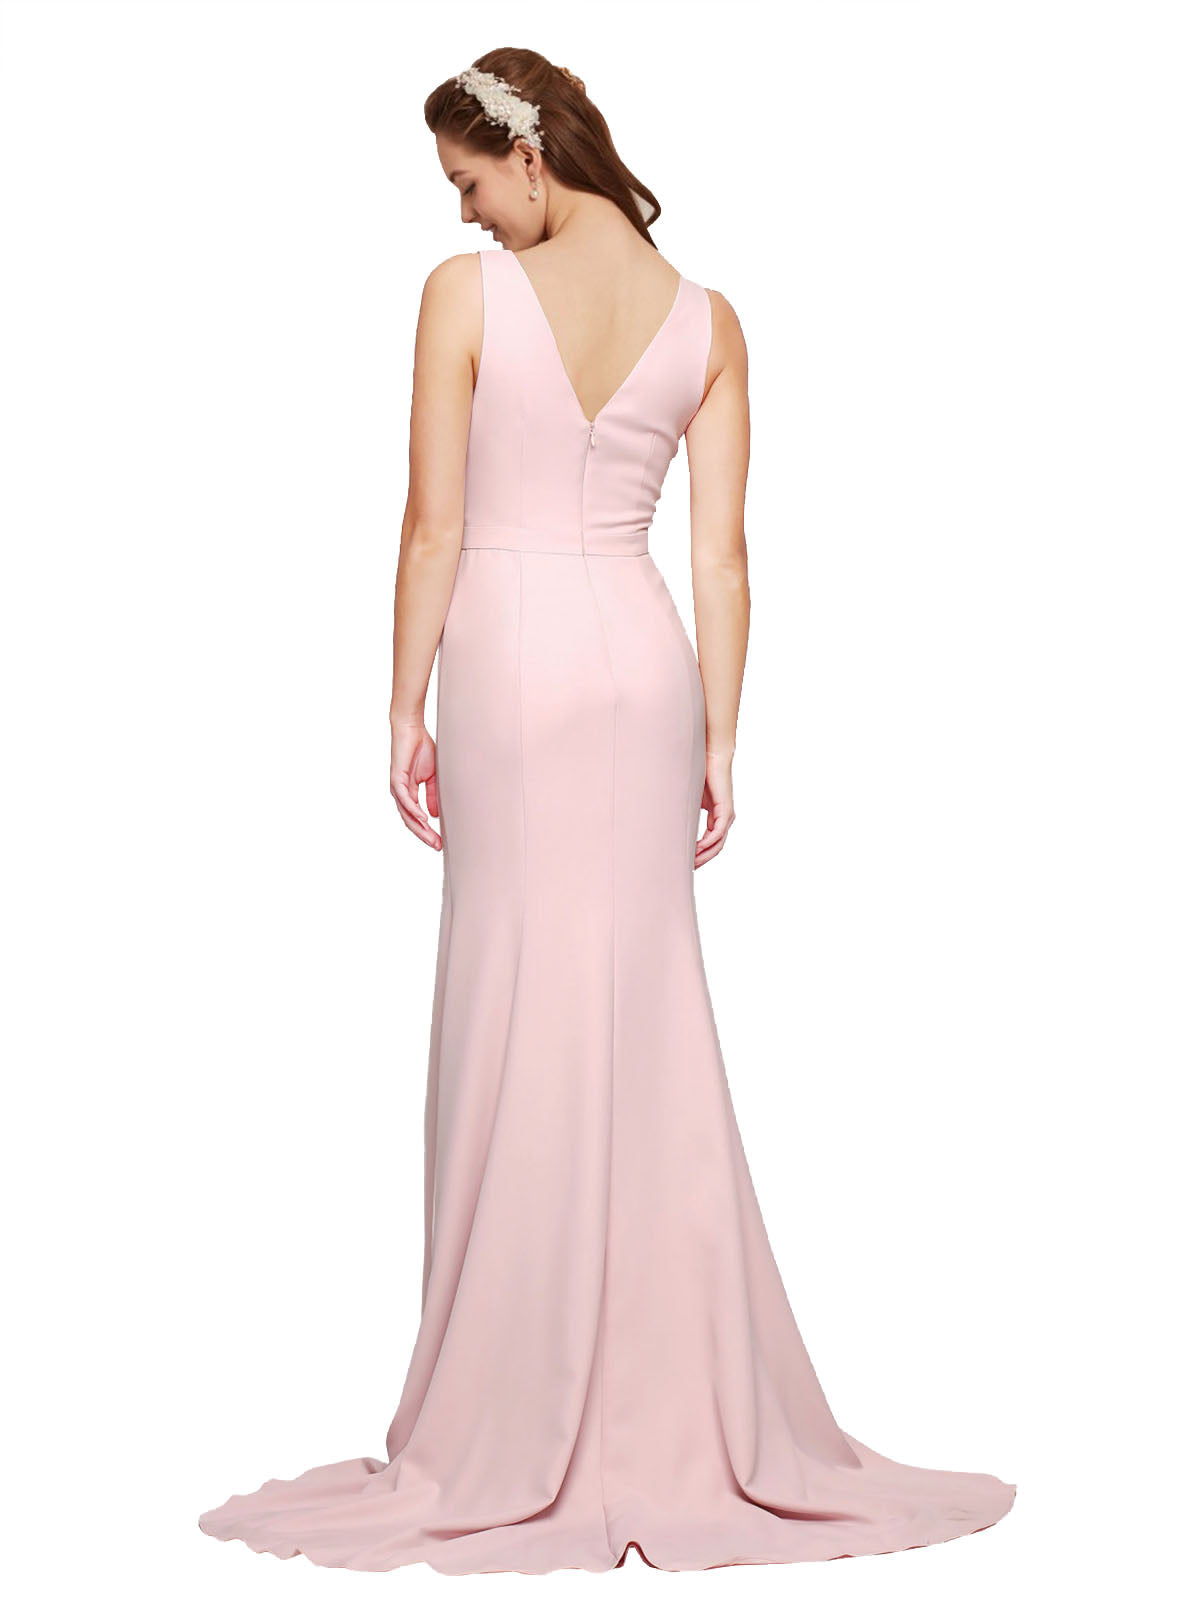 RightBrides Polly Long A-Line V-Neck Sweep Train Floor Length Sleeveless Pink Stretch Crepe Bridesmaid Dress